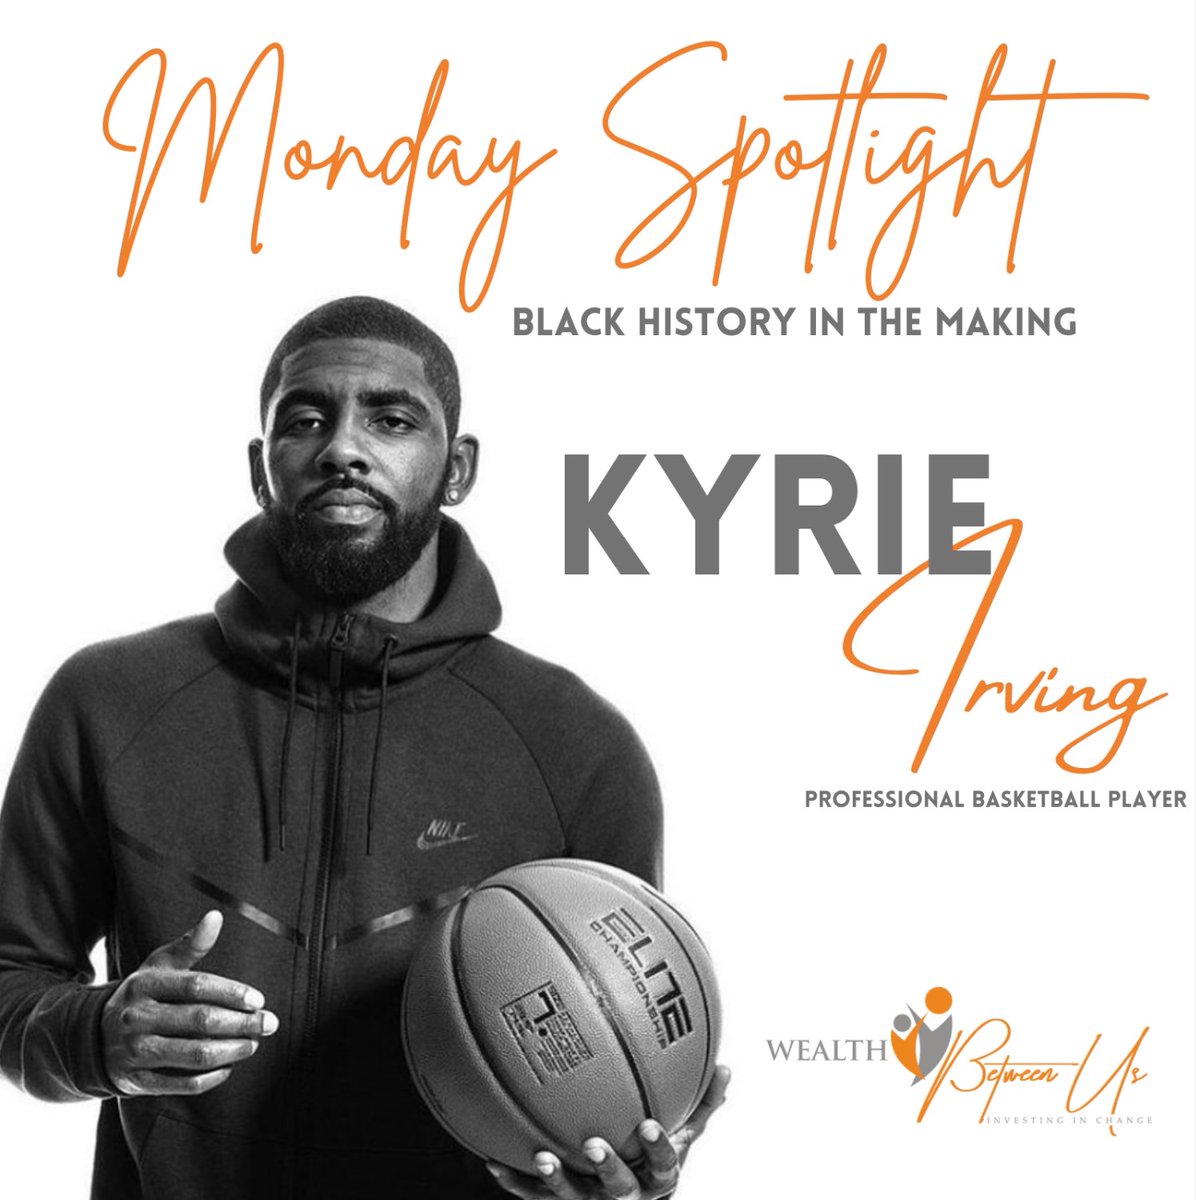 We're back for another #MondaySpotlight! ✨

@KyrieIrving has expressed his love for giving back, and with a passion for basketball + the importance of education, he's made it his purpose to set an example to aspiring youth. (Keep reading for more details! ⬇️)